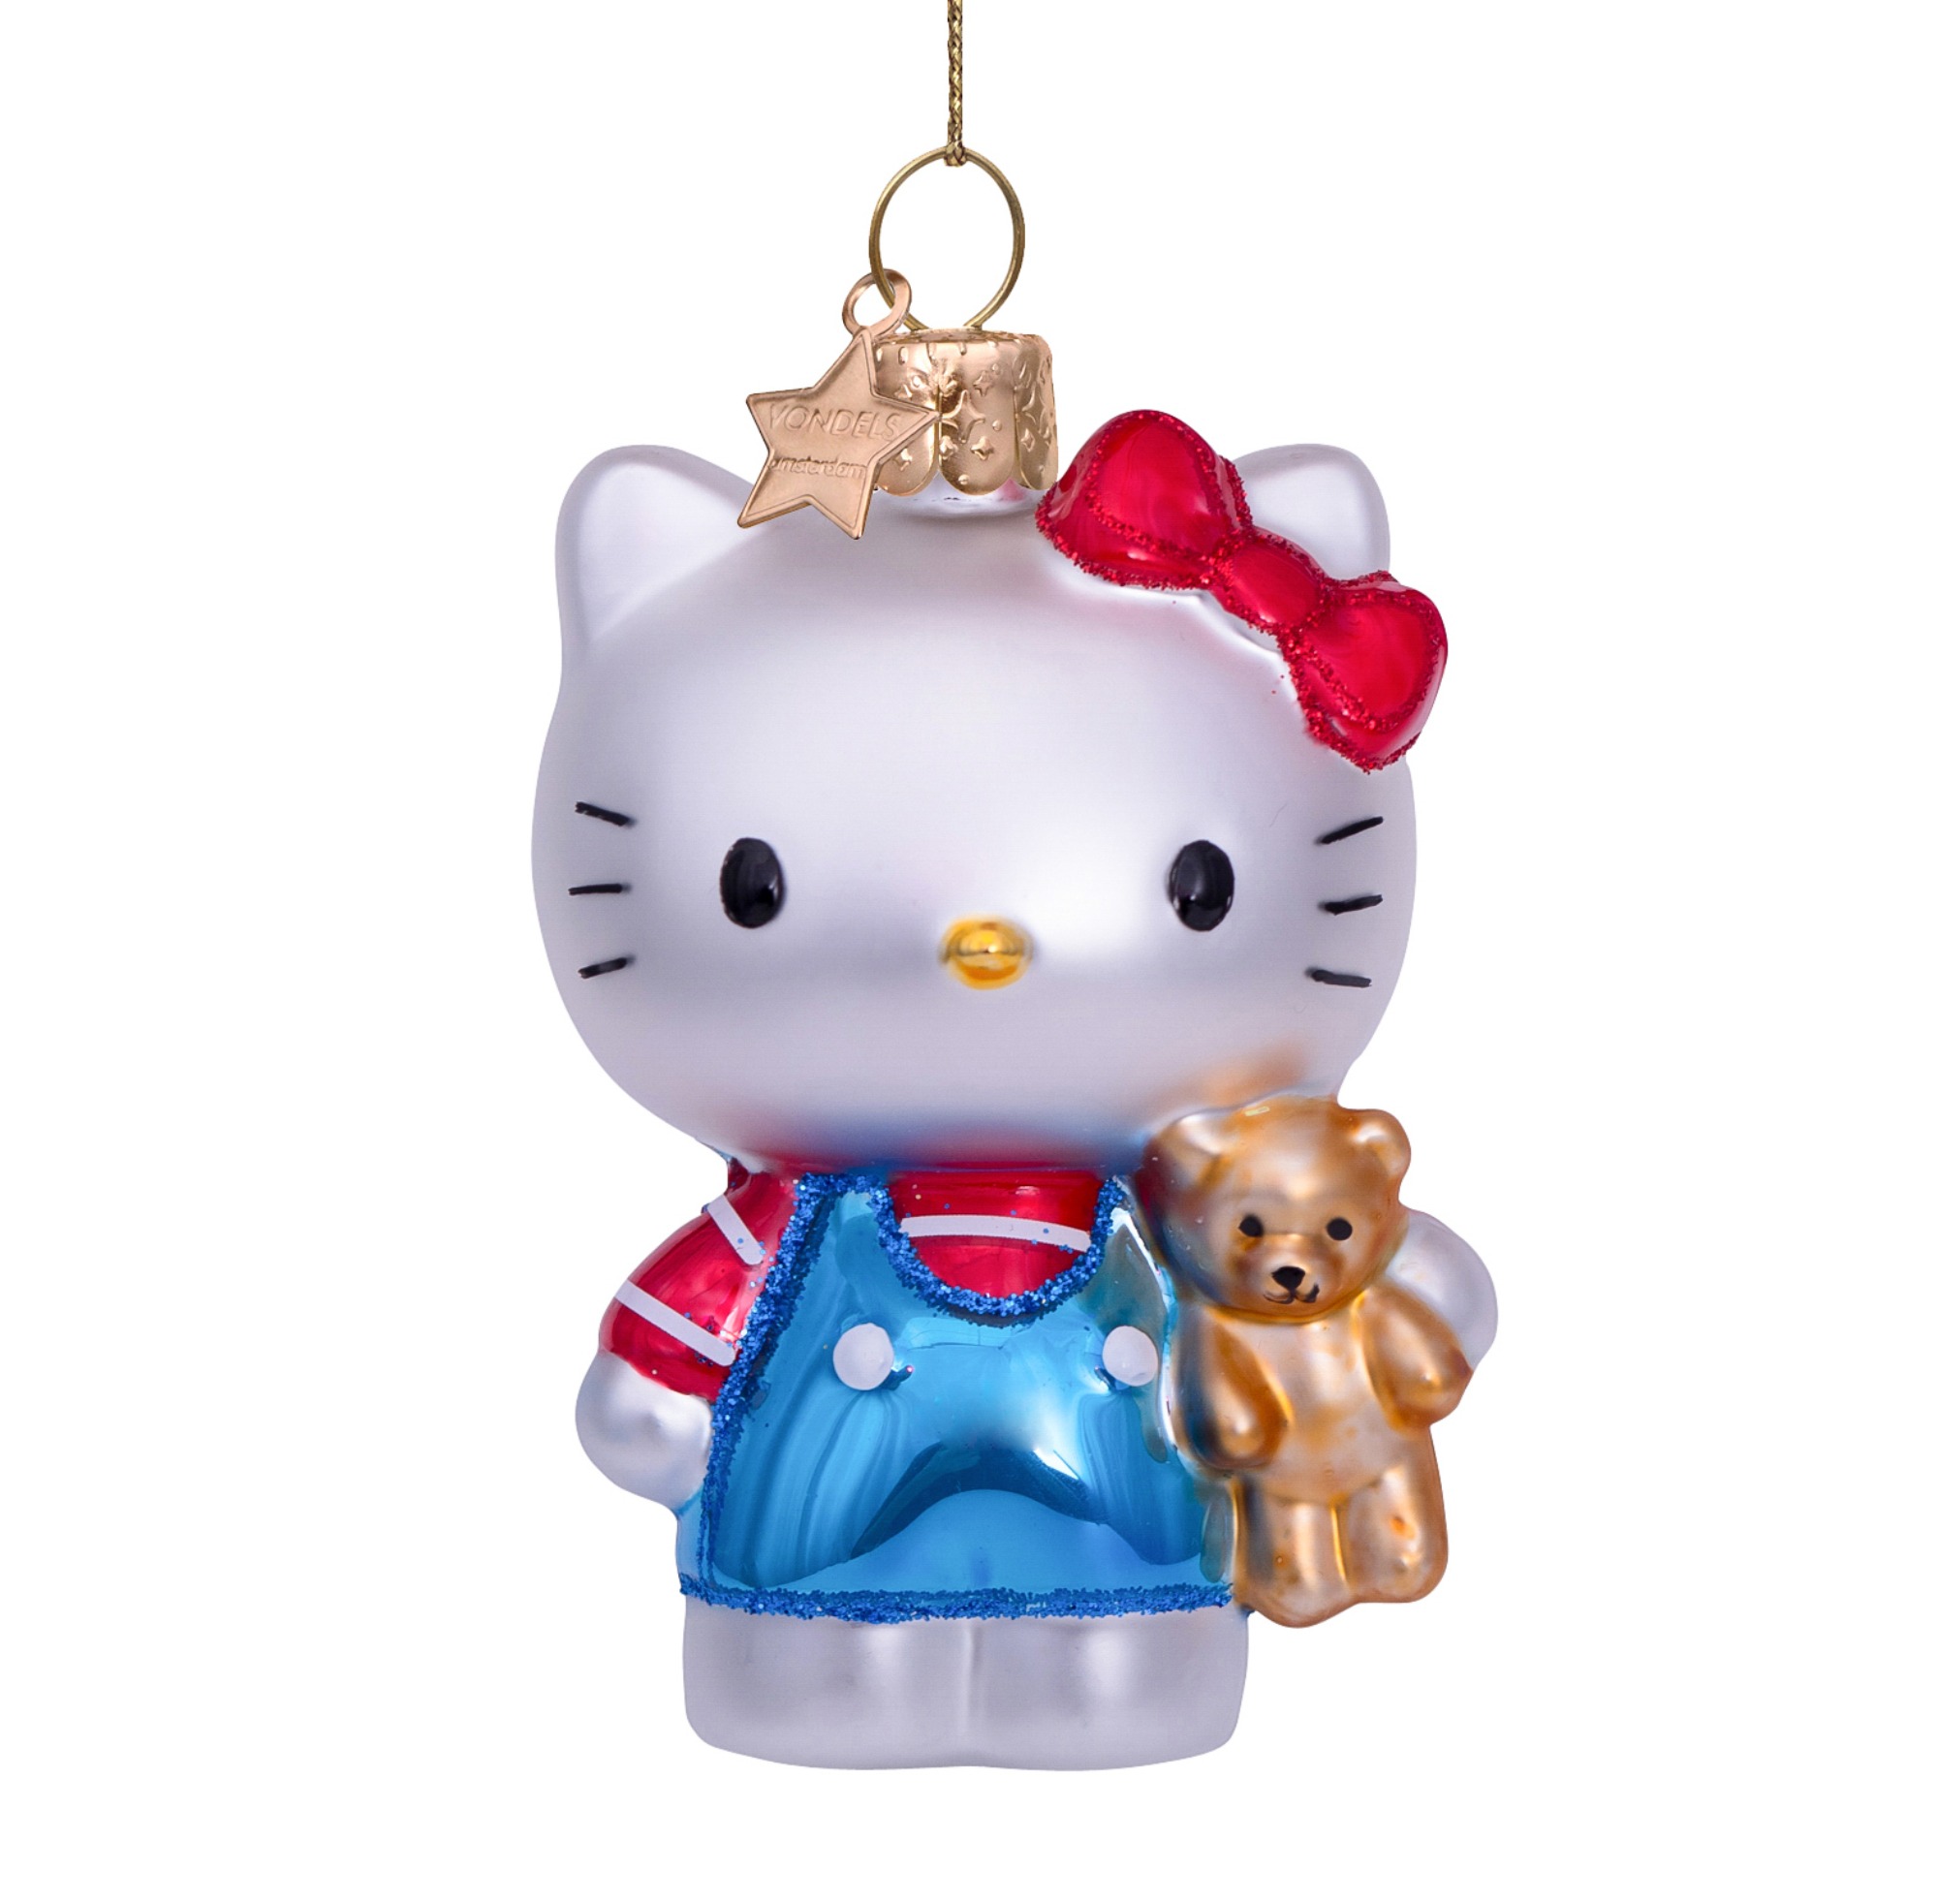 VONDELS Ornament Glass Hello Kitty Blue with Bear